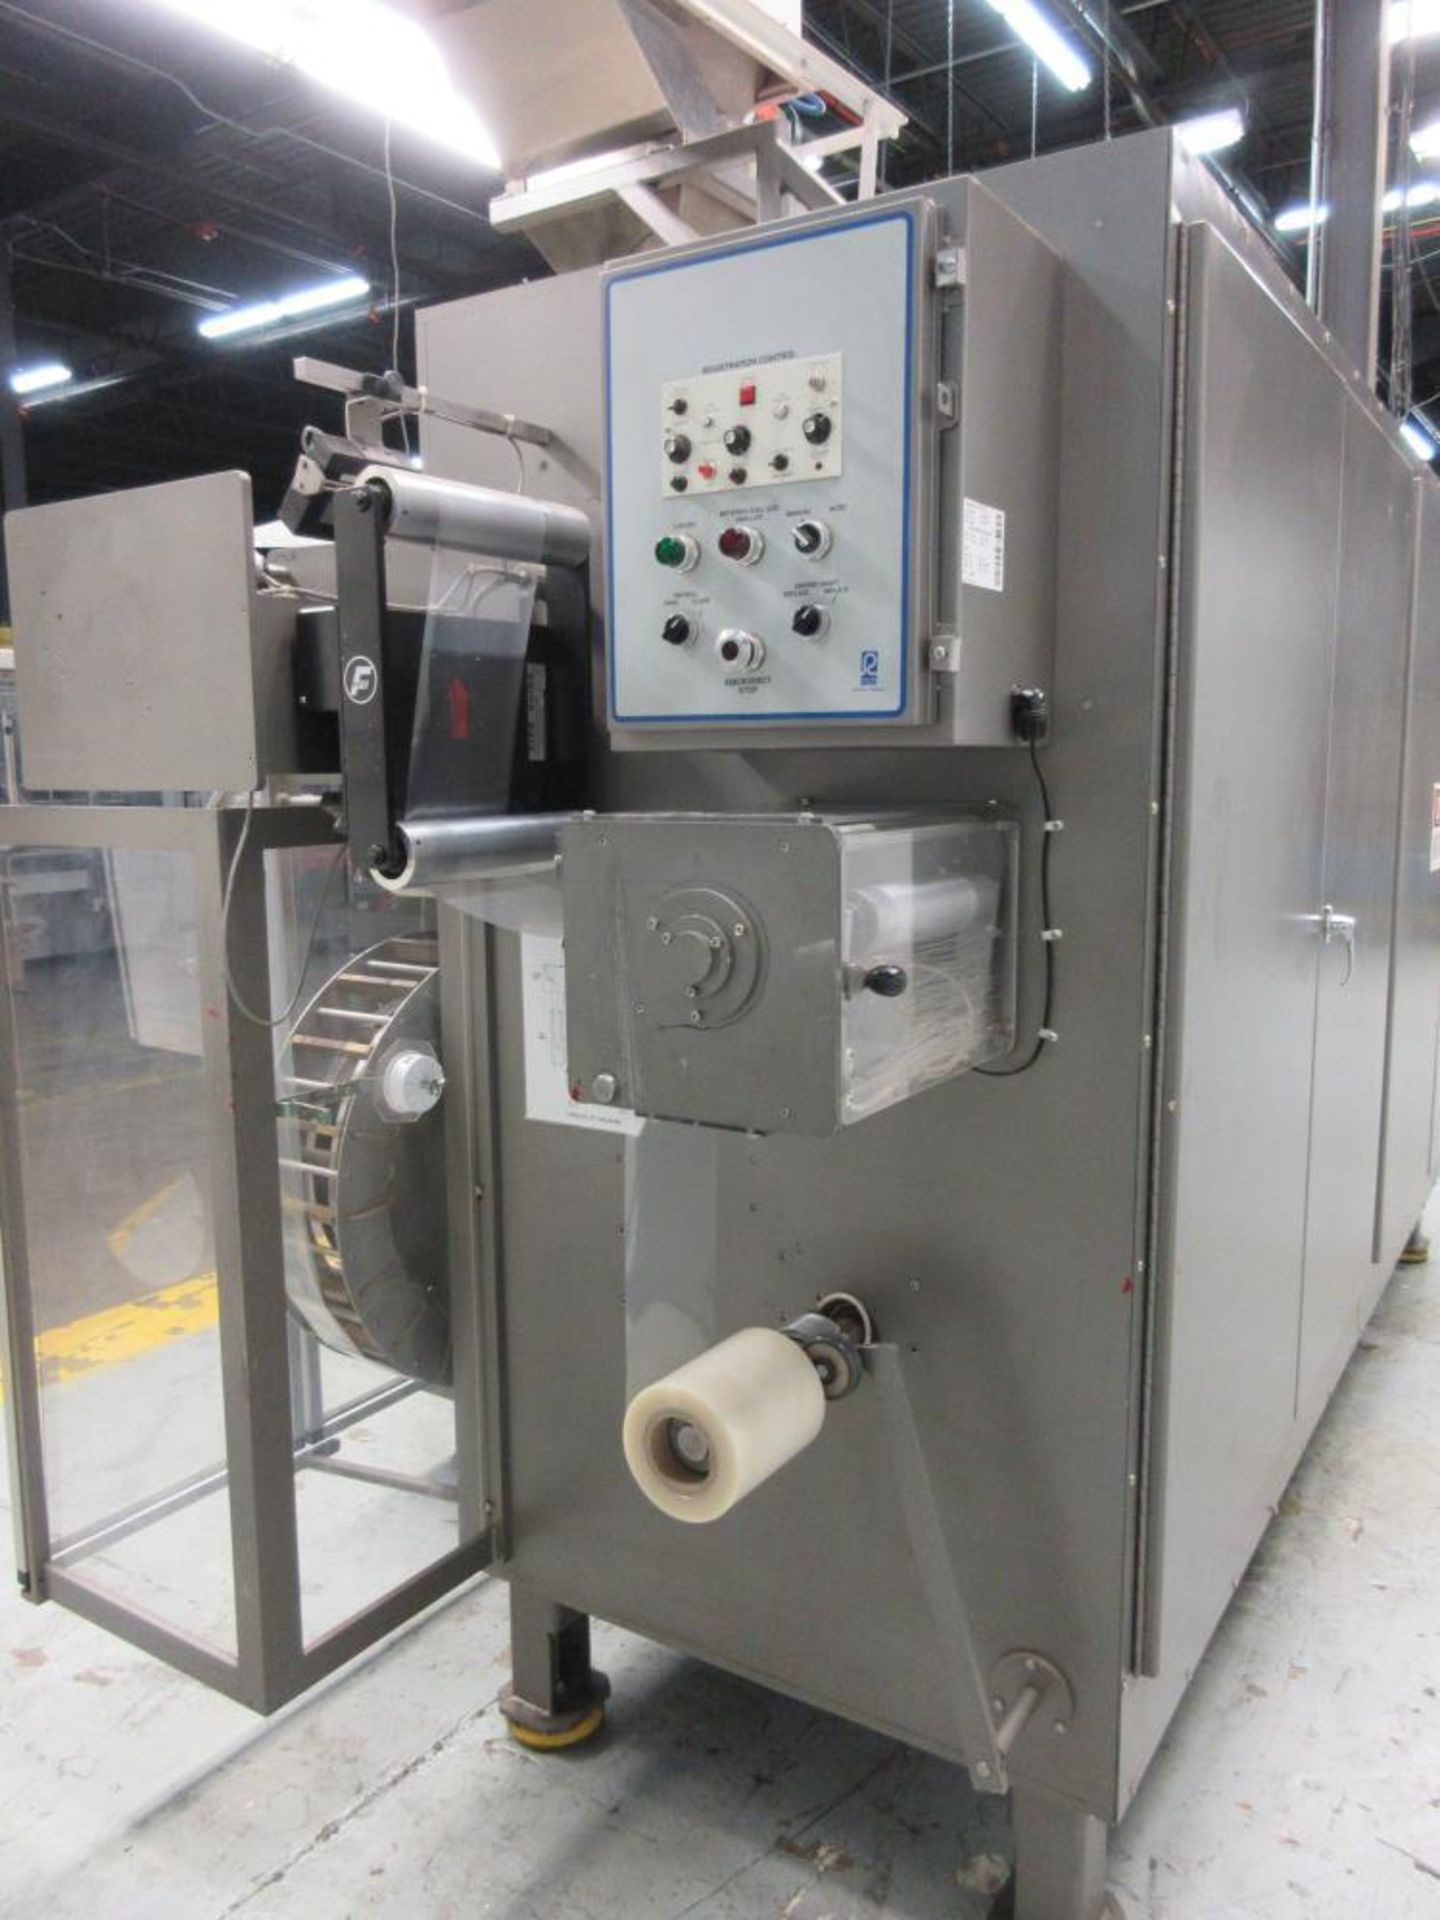 Ropak Model V High-Speed Rotary Pouch Machine with Volumetric Screw Product Feeder - Image 11 of 30